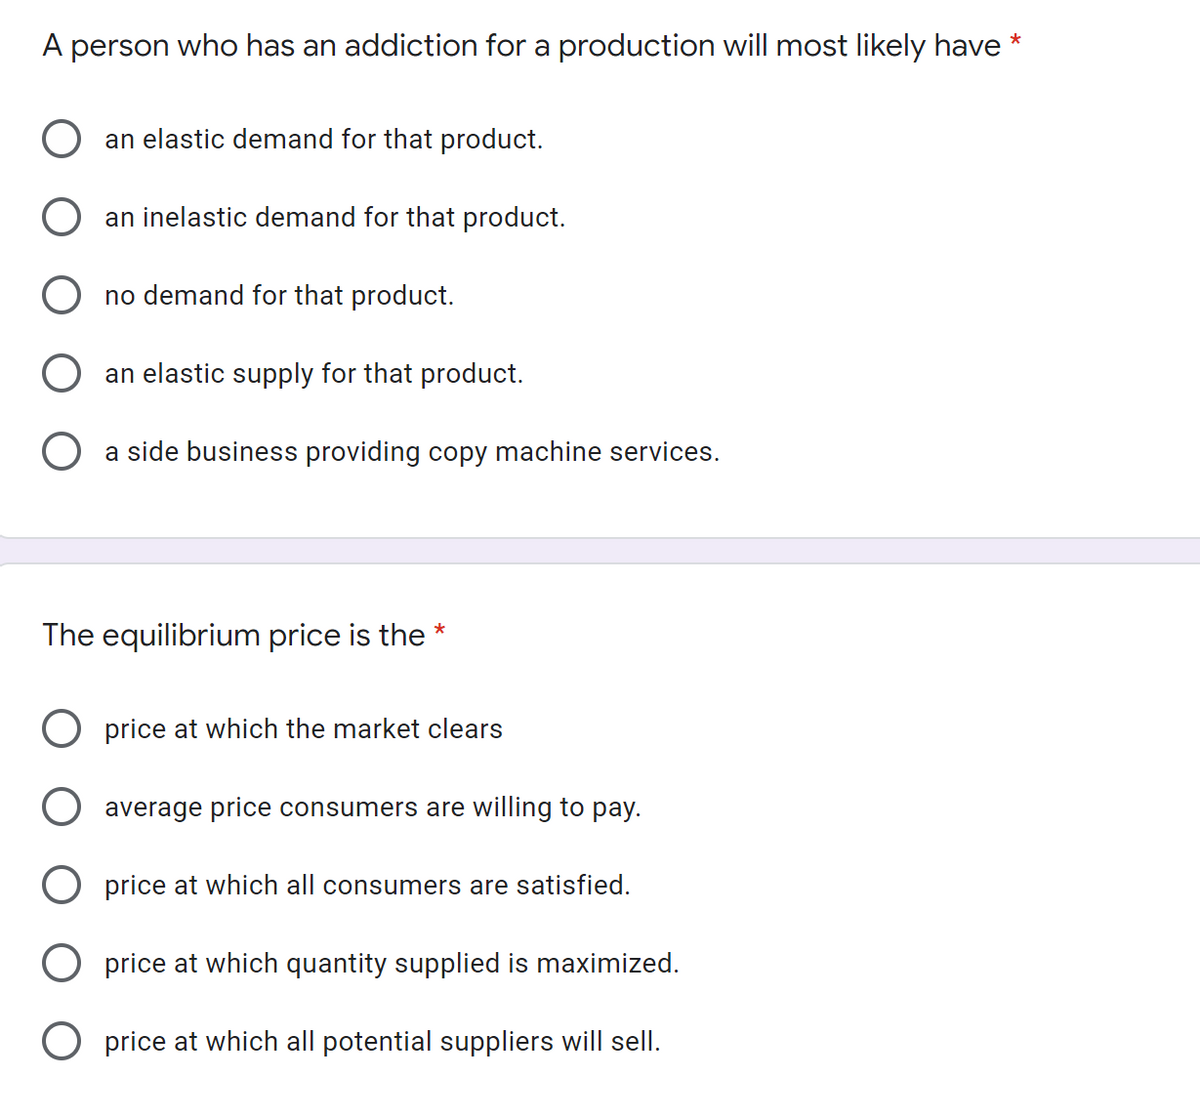 A person who has an addiction for a production will most likely have *
an elastic demand for that product.
an inelastic demand for that product.
no demand for that product.
an elastic supply for that product.
a side
siness providing copy machine services.
The equilibrium price is the *
price at which the market clears
average price consumers are willing to pay.
O price at which all consumers are satisfied.
O price at which quantity supplied is maximized.
O price at which all potential suppliers will sell.
